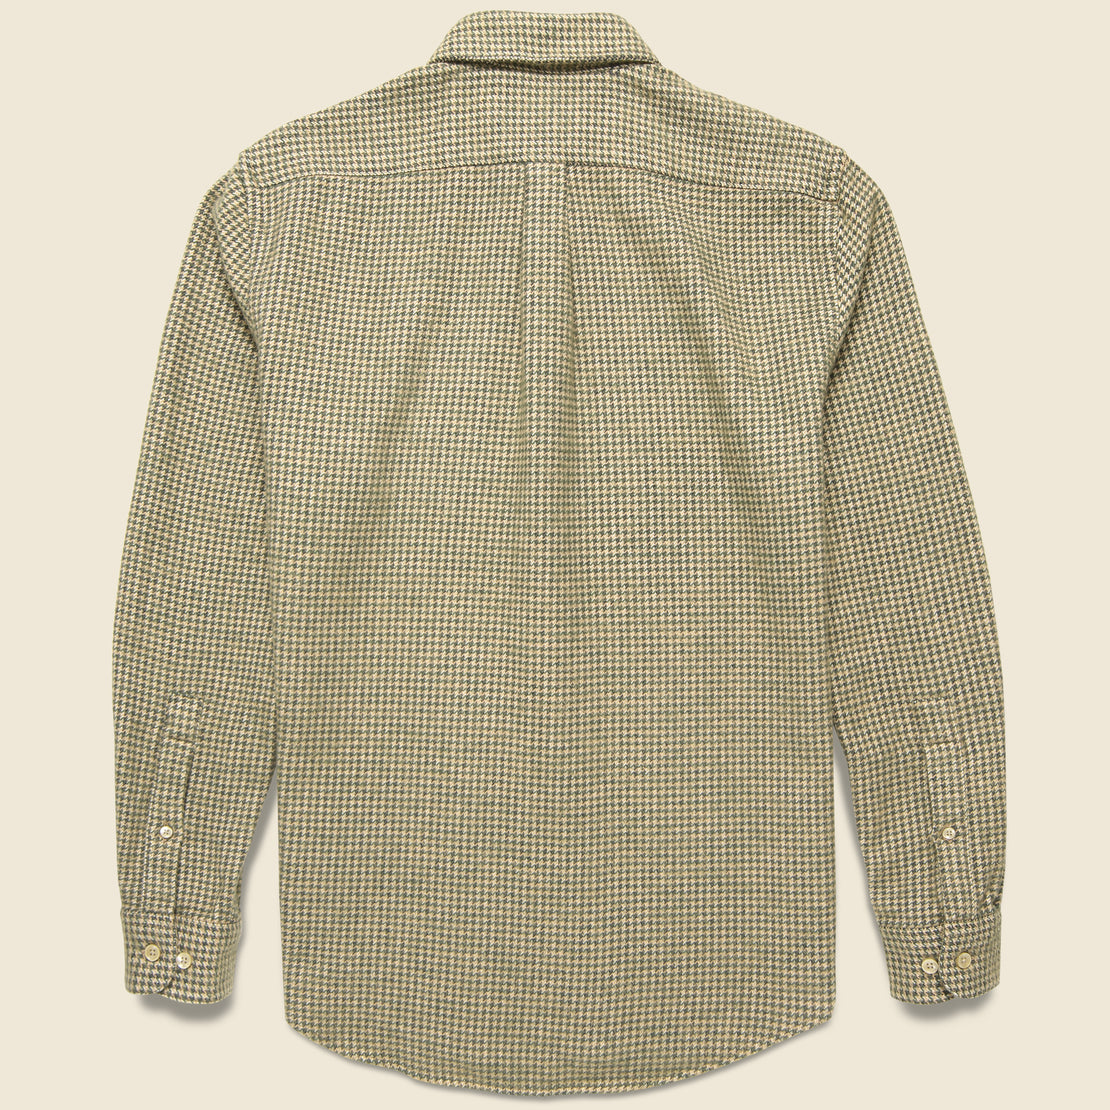 Sottum Shirt - Brown Houndstooth - Portuguese Flannel - STAG Provisions - Tops - L/S Woven - Other Pattern